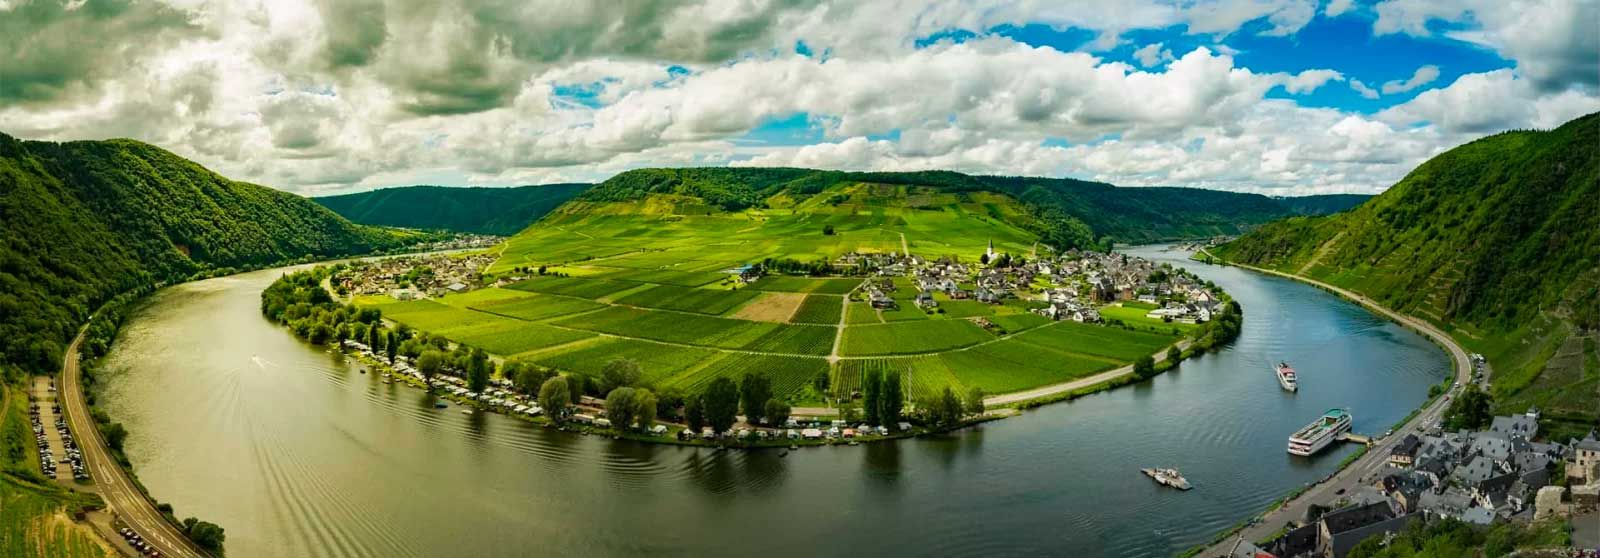 Mosul river in Germany